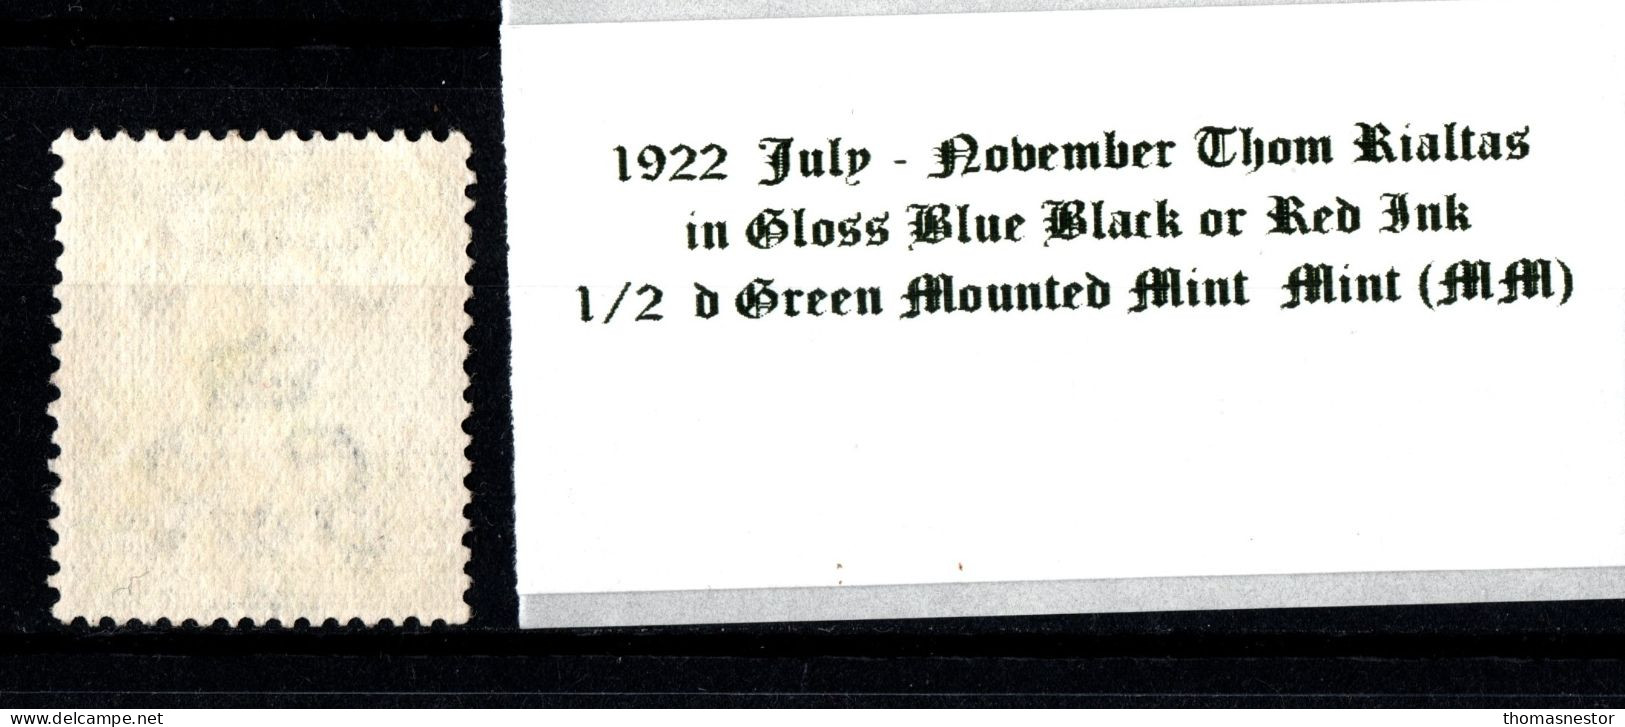 1922 July - November Thom Rialtas 5 Line Overprint In Shiny Blue Black Or Red Ink 1/2 D Green Mounted Mint (MM) - Neufs